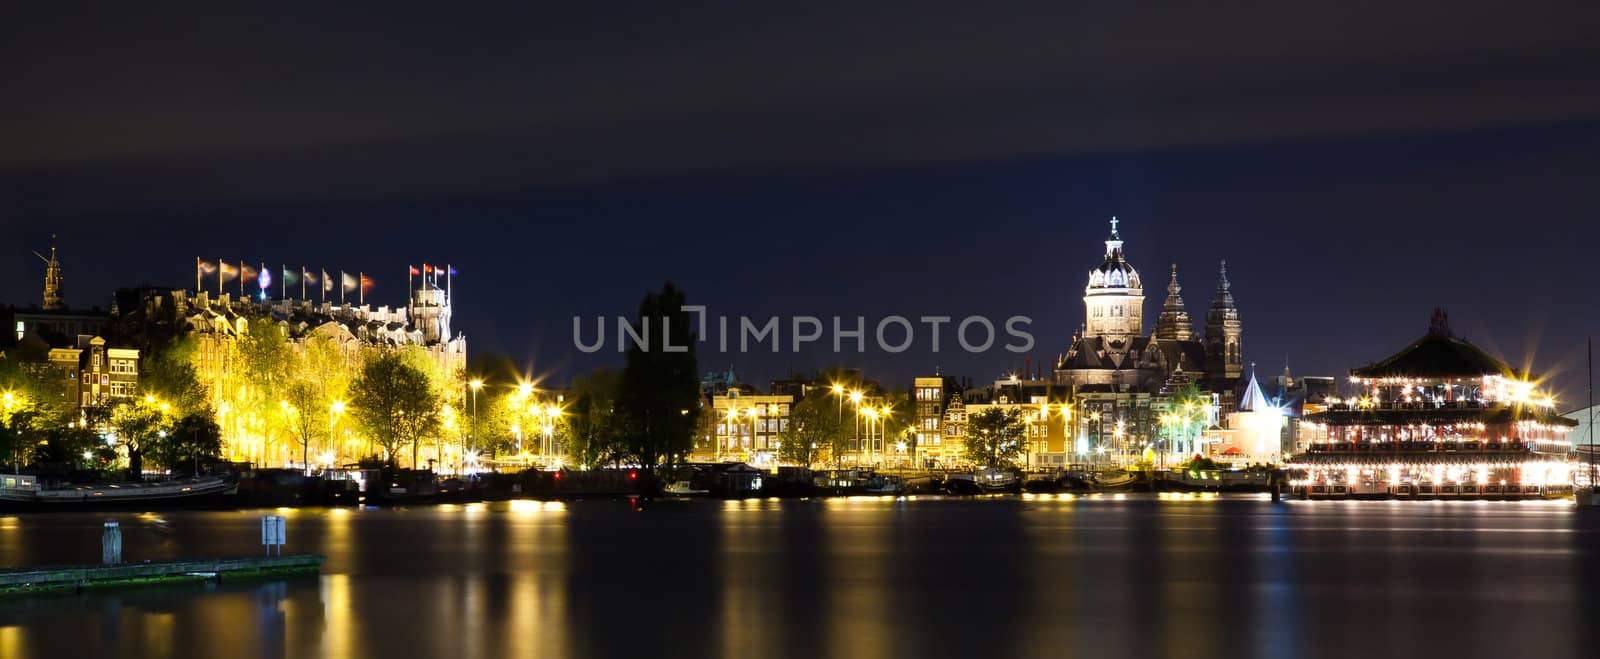 Amsterdam night panorama - view on Sea Palace, Church of St. Nicholas and Grand Hotel Amrath - long time exposure